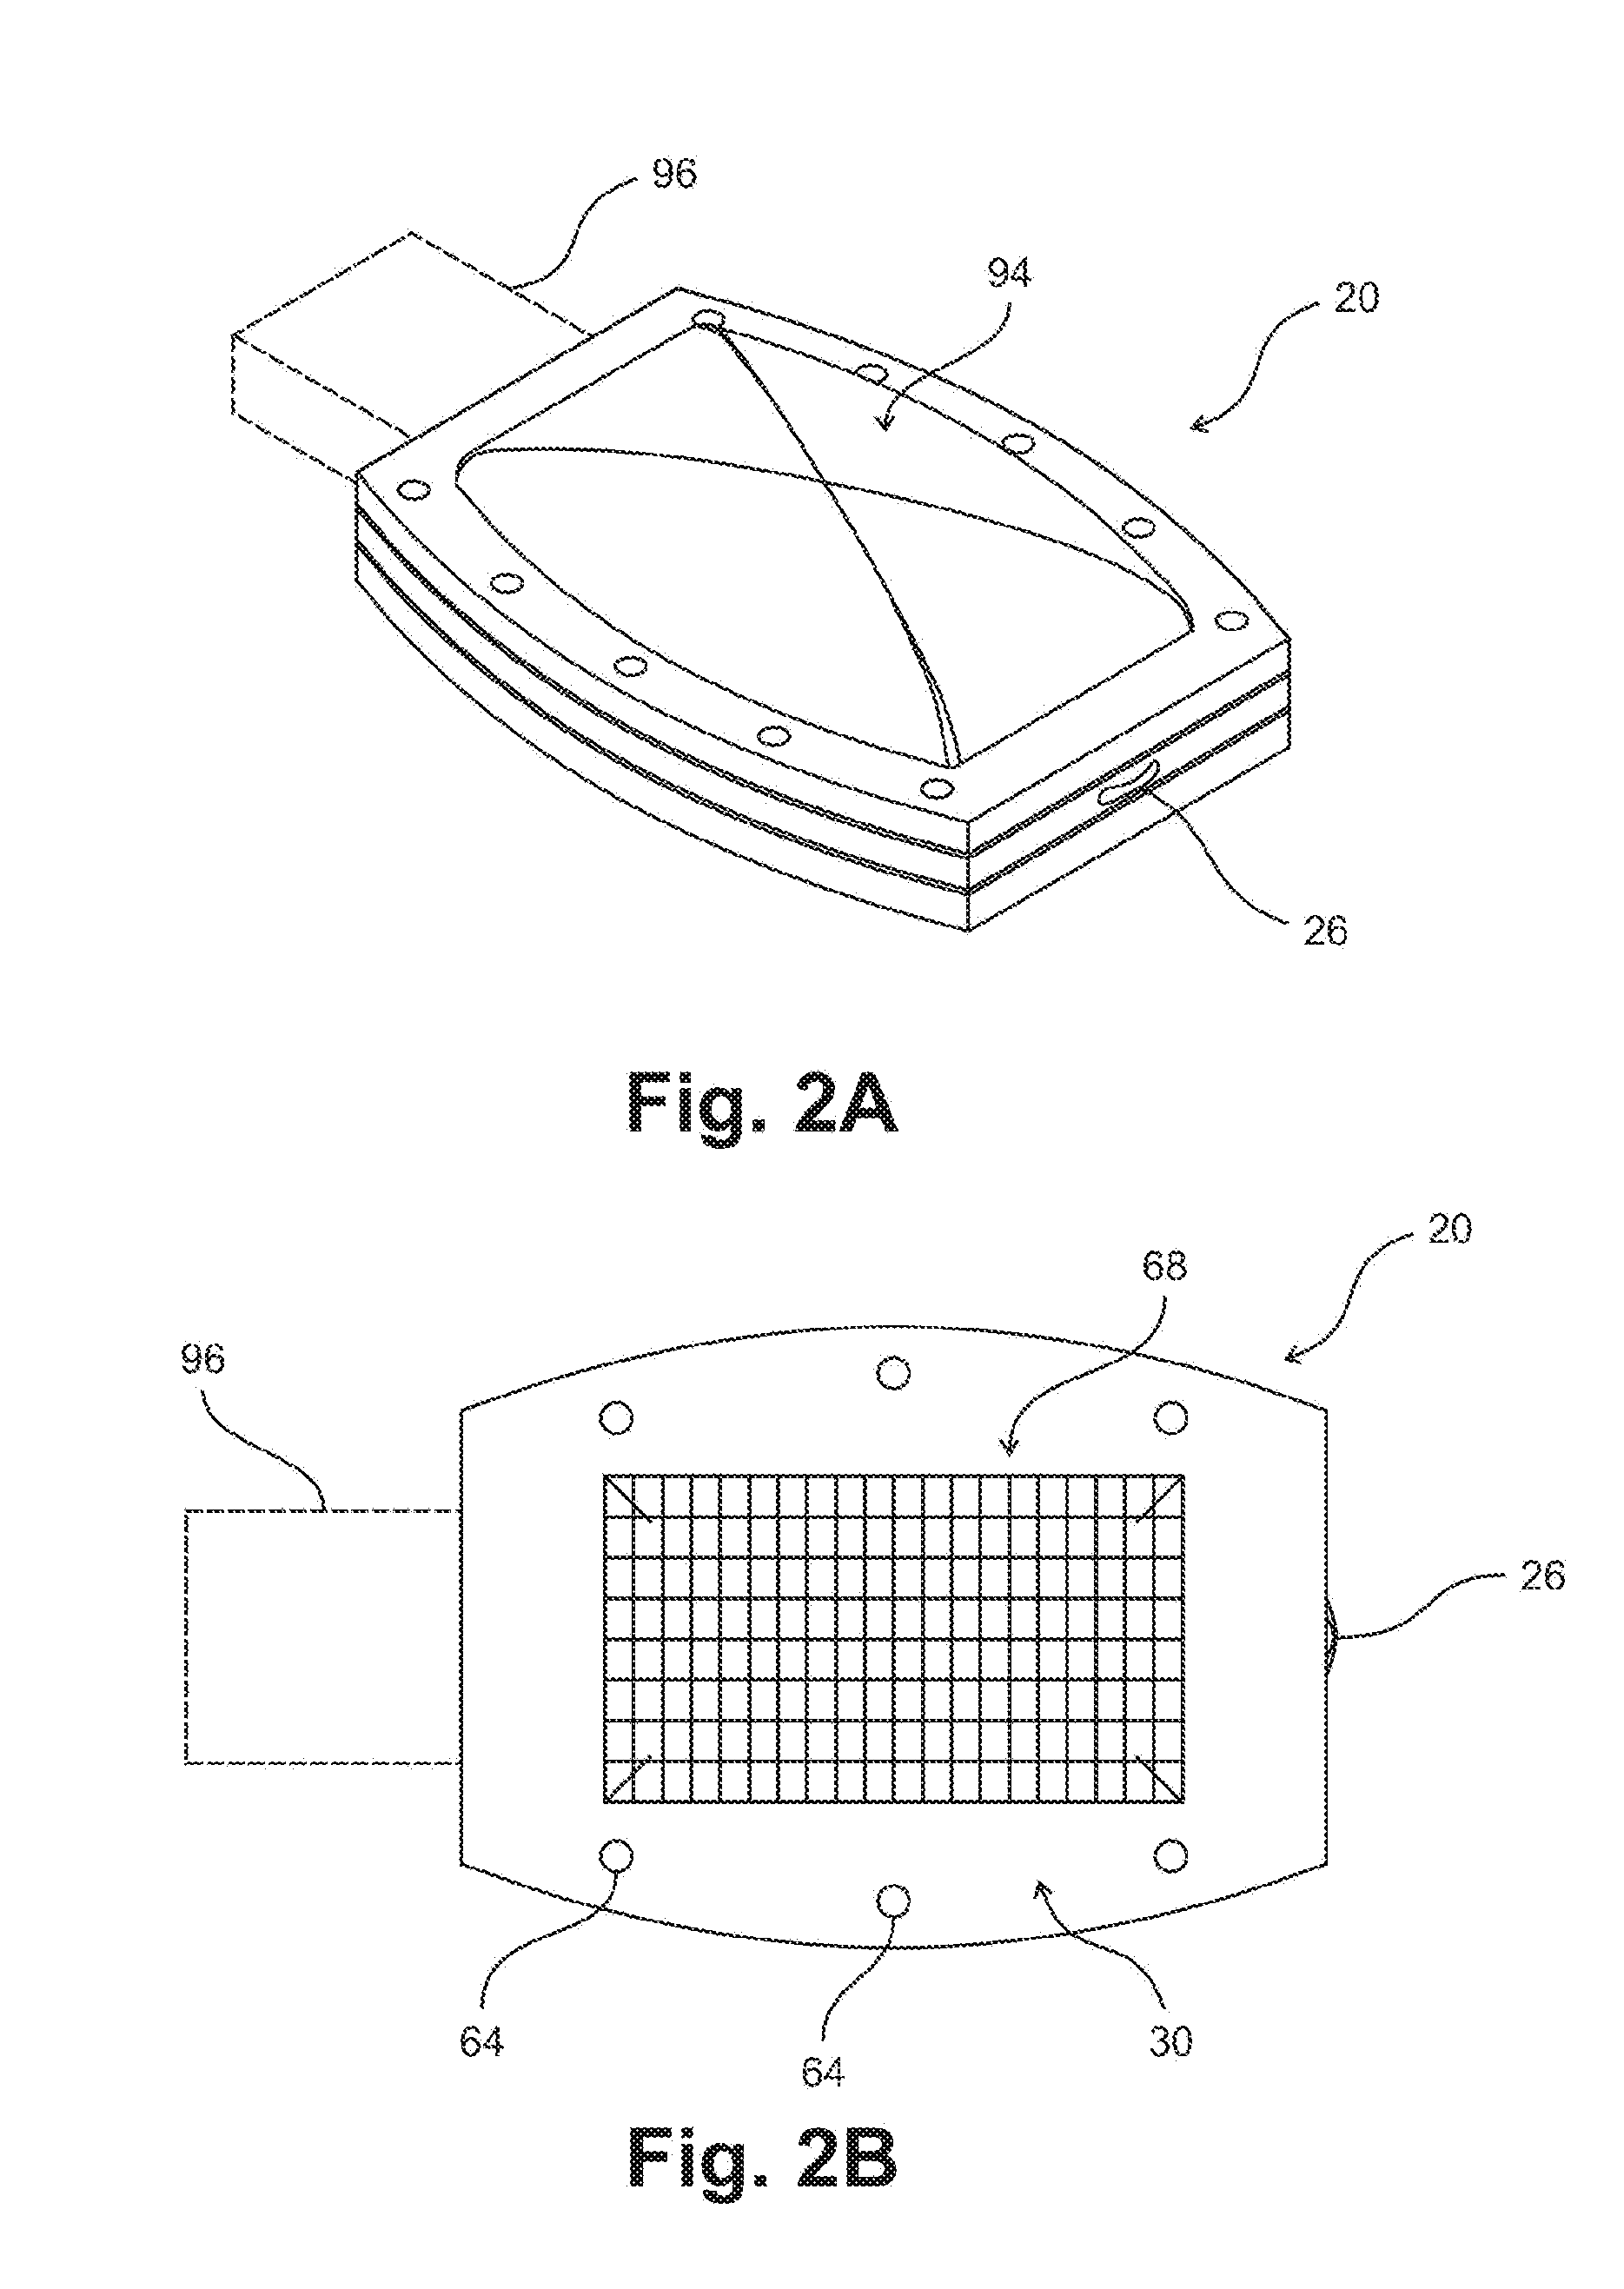 Device and method for non-invasive glucose monitoring